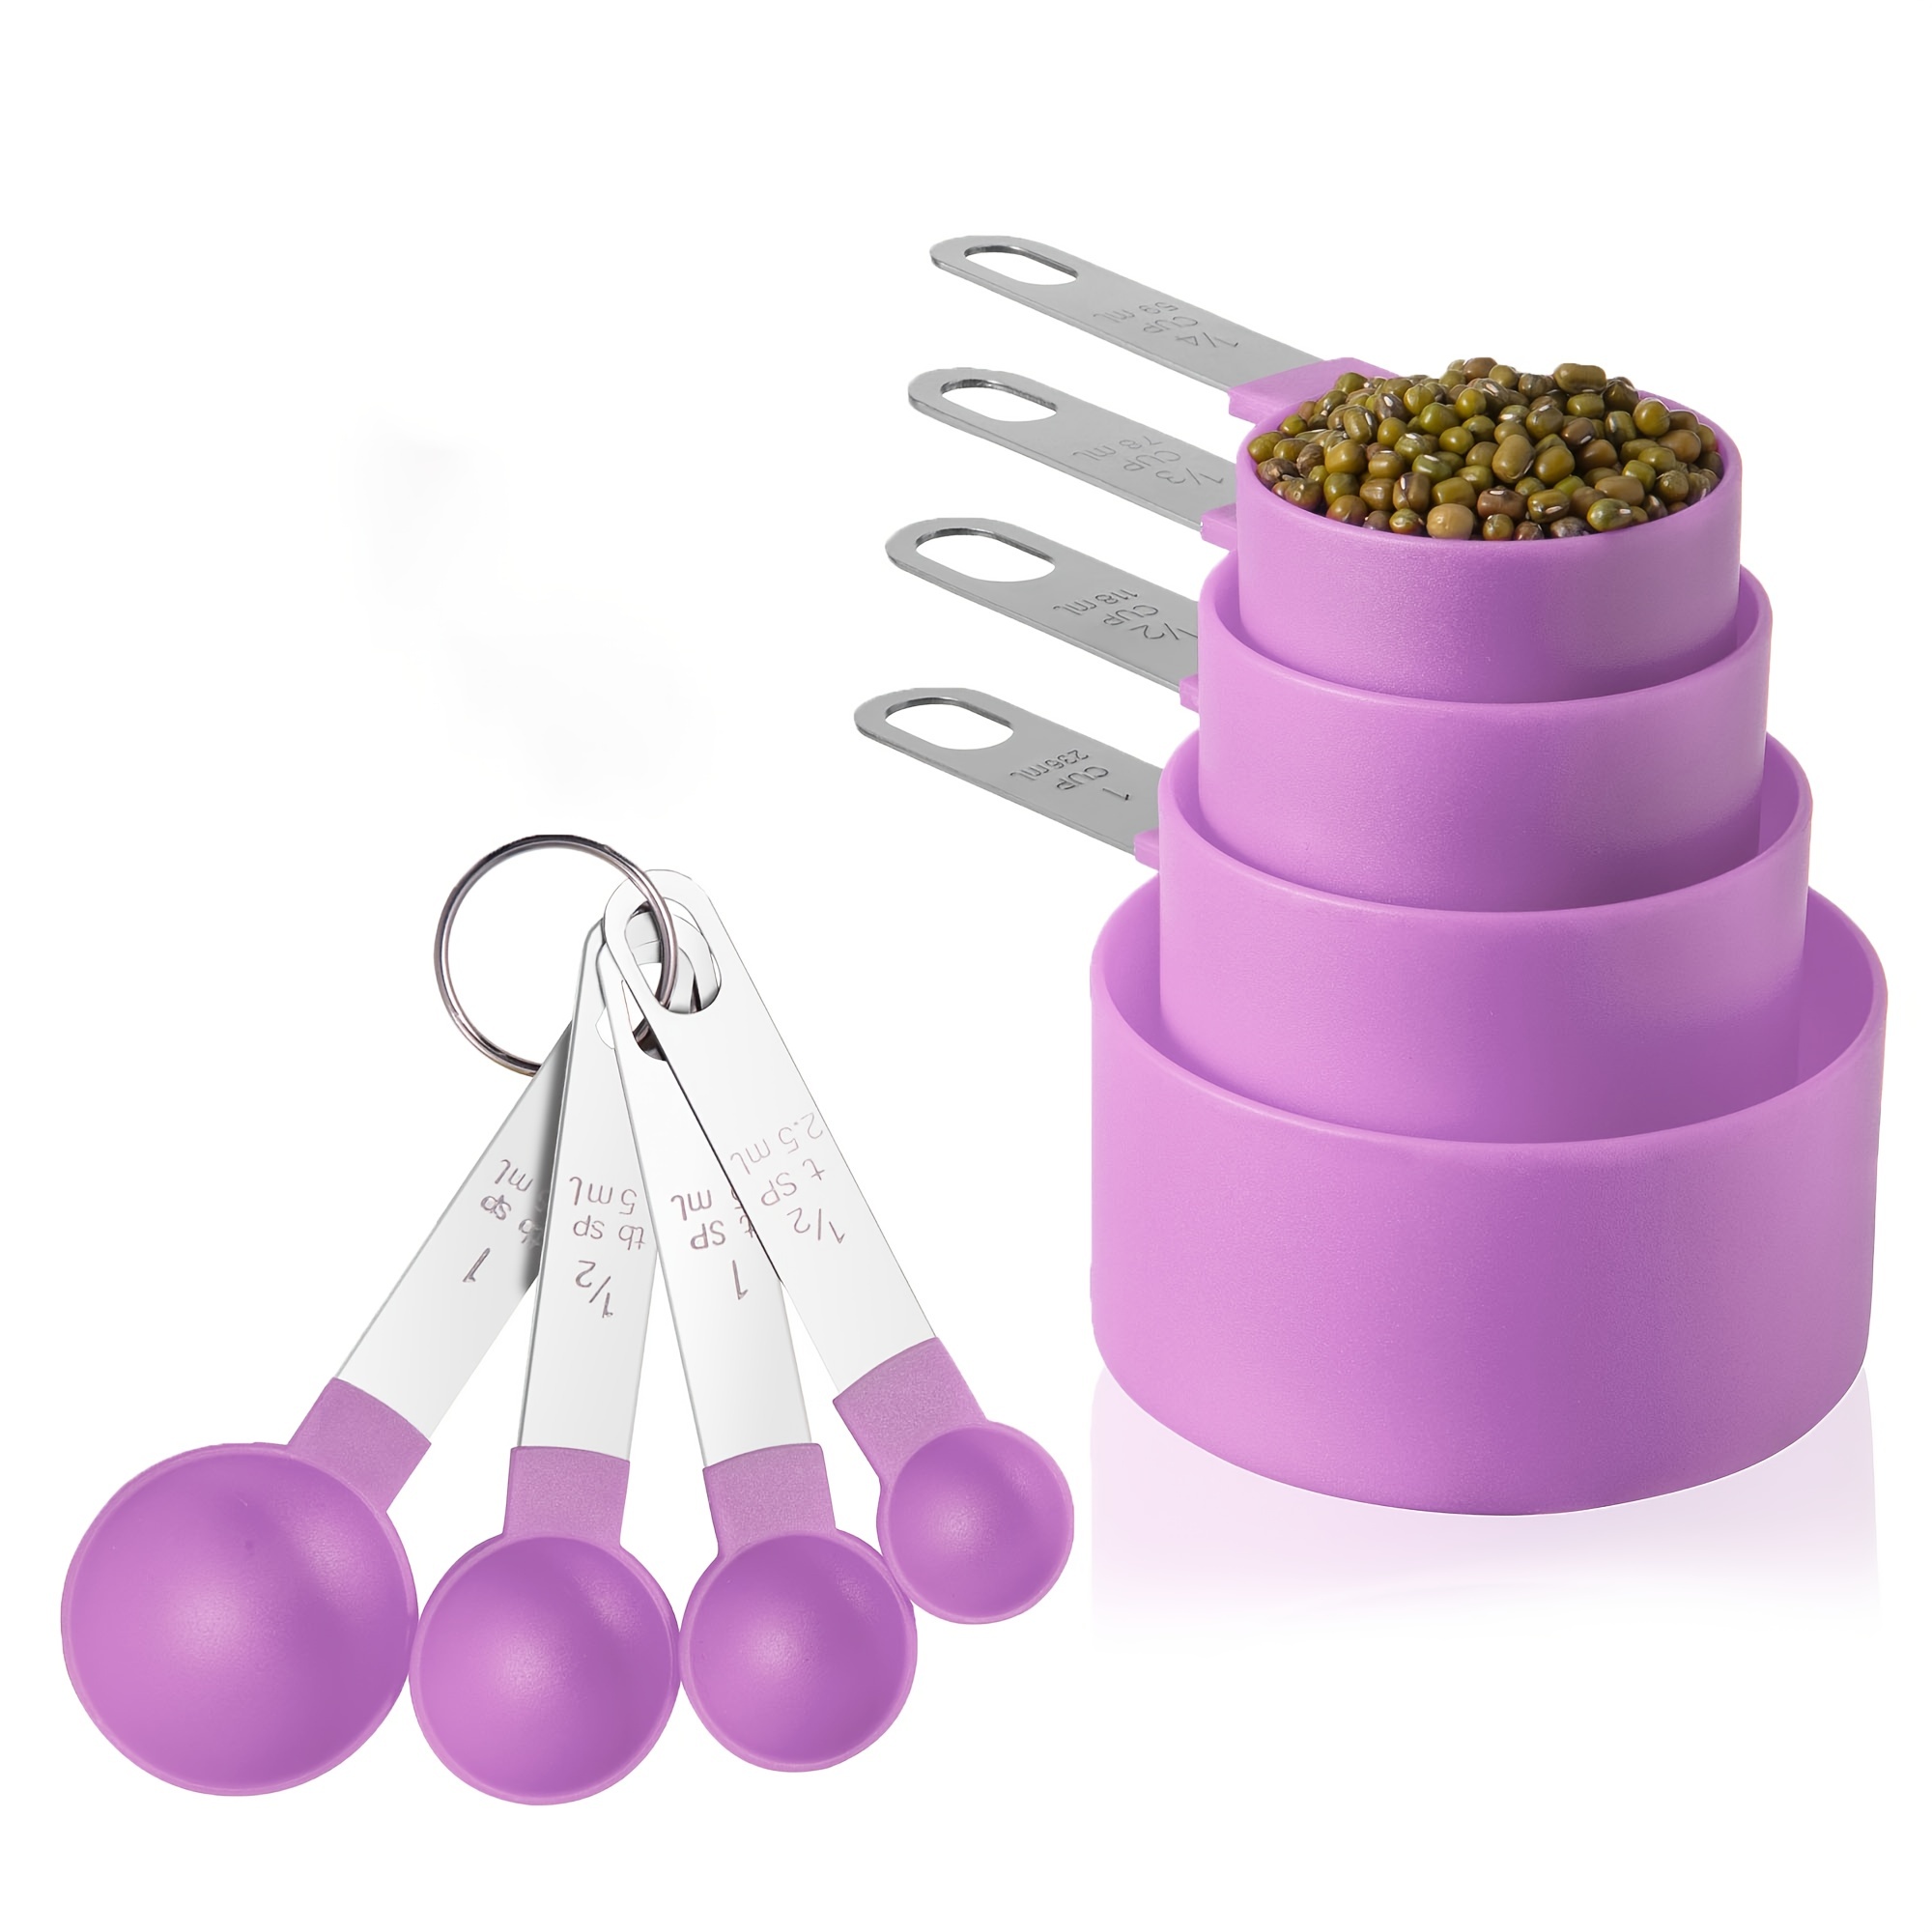 POURfect 22pc Dark Plum/Purple Measuring Spoon & Cup Sets are the worlds  largest assortment of sizes & worlds most accurate 